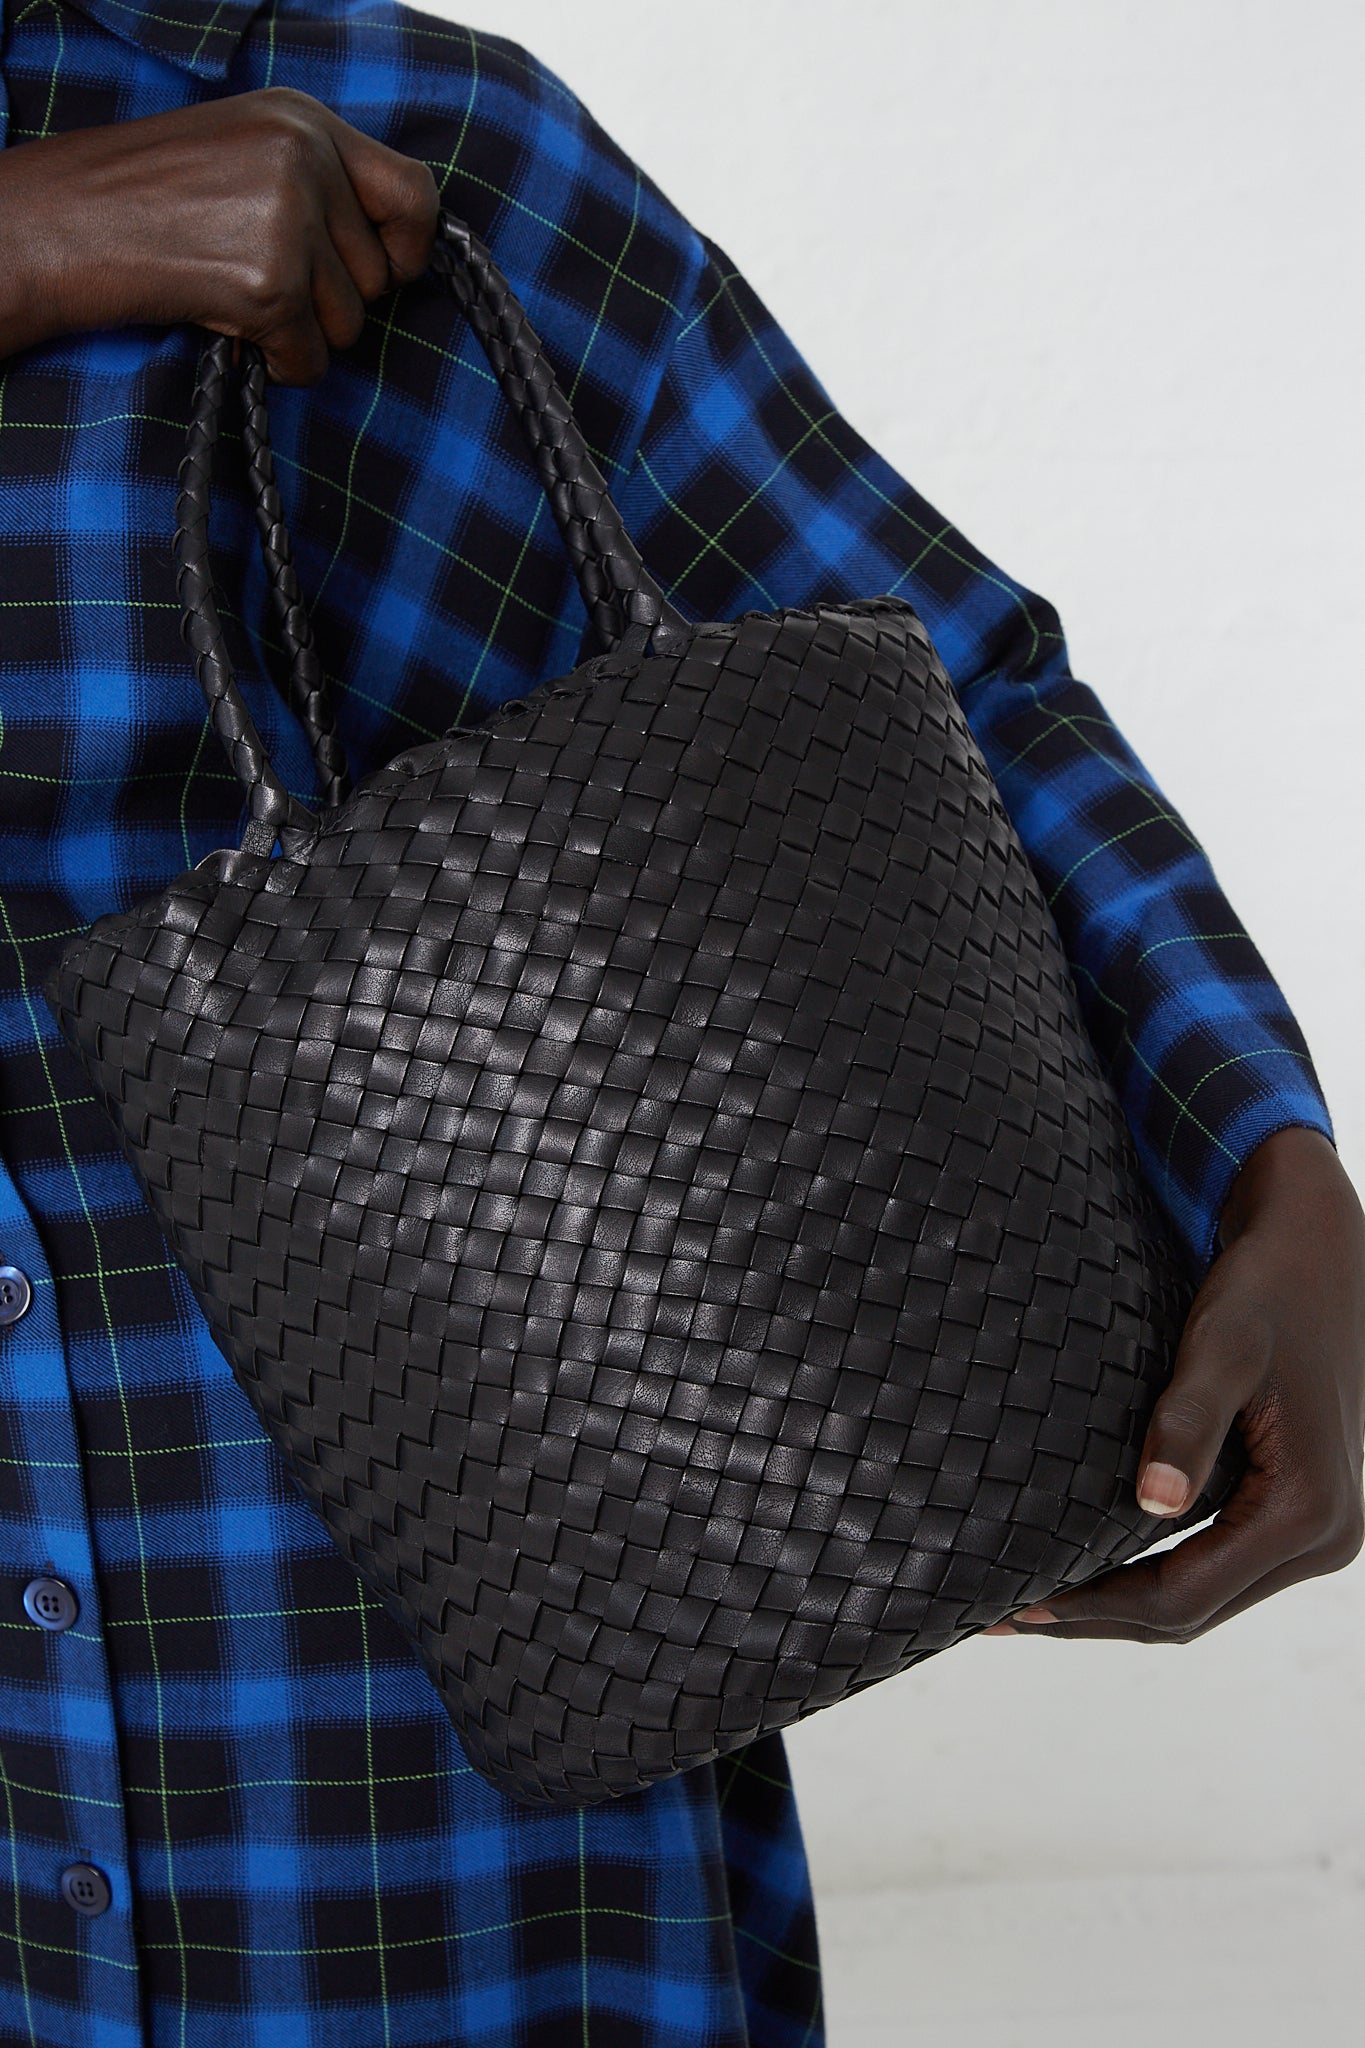 A woman is holding a Dragon Diffusion Jacky Bucket Bag in Black. Available at Oroboro Store.